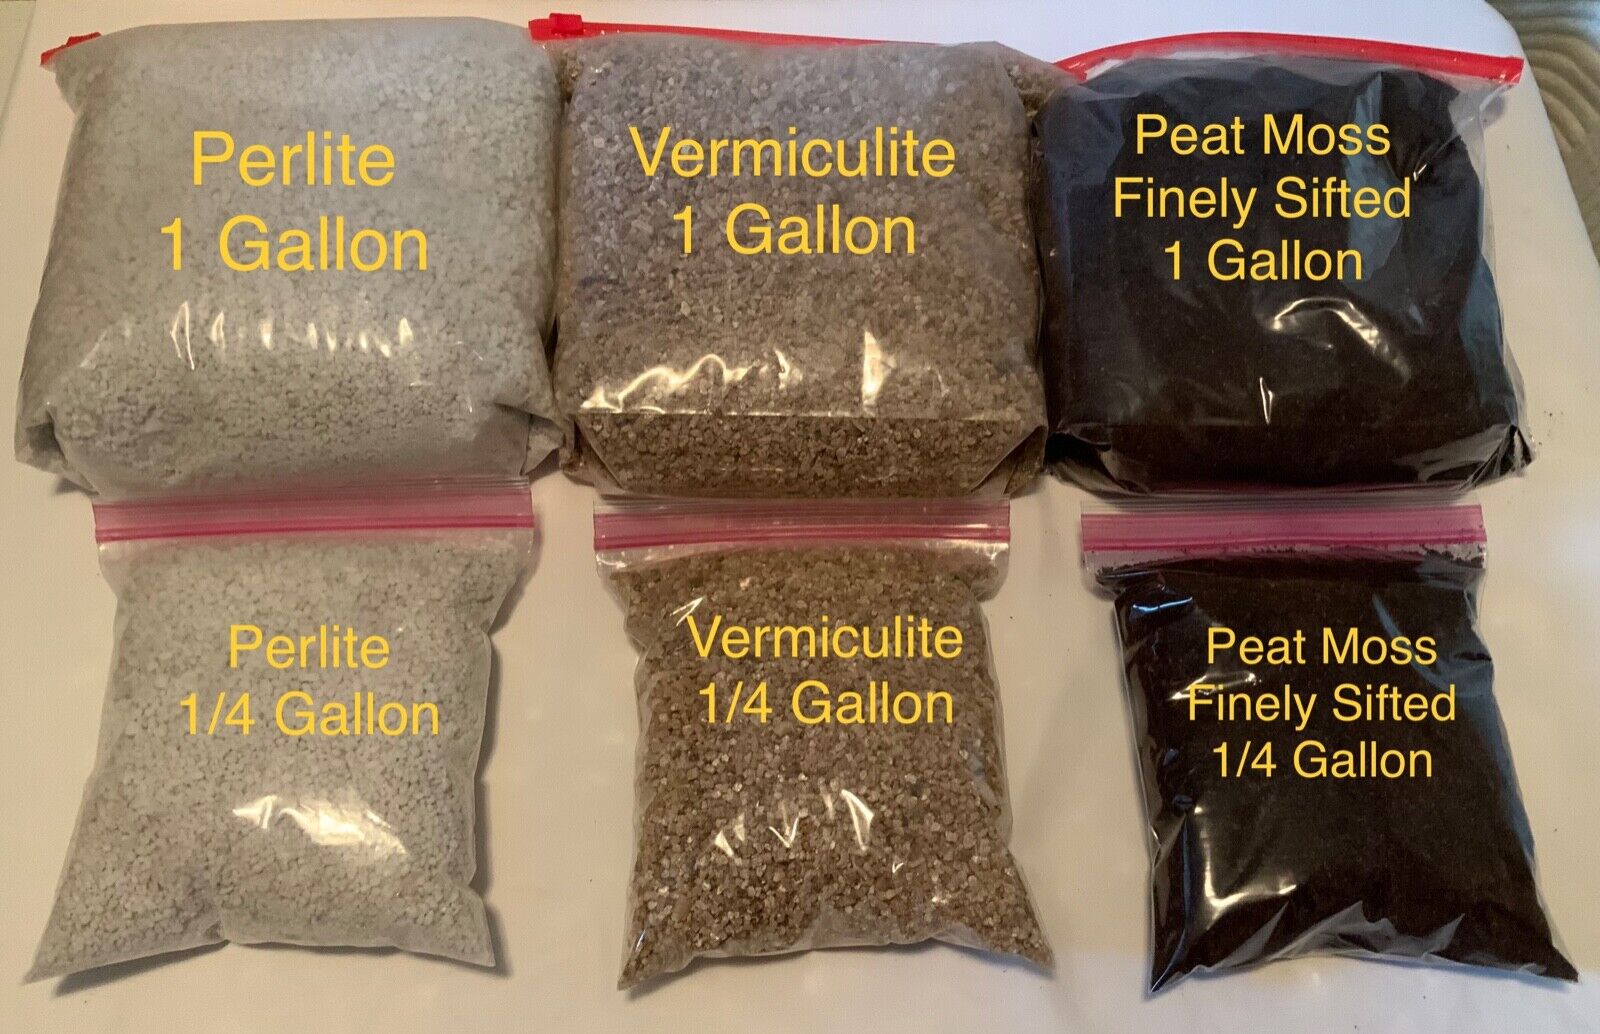 Perlite, Vermiculite & Peat Moss - Great Seed Starting Mix